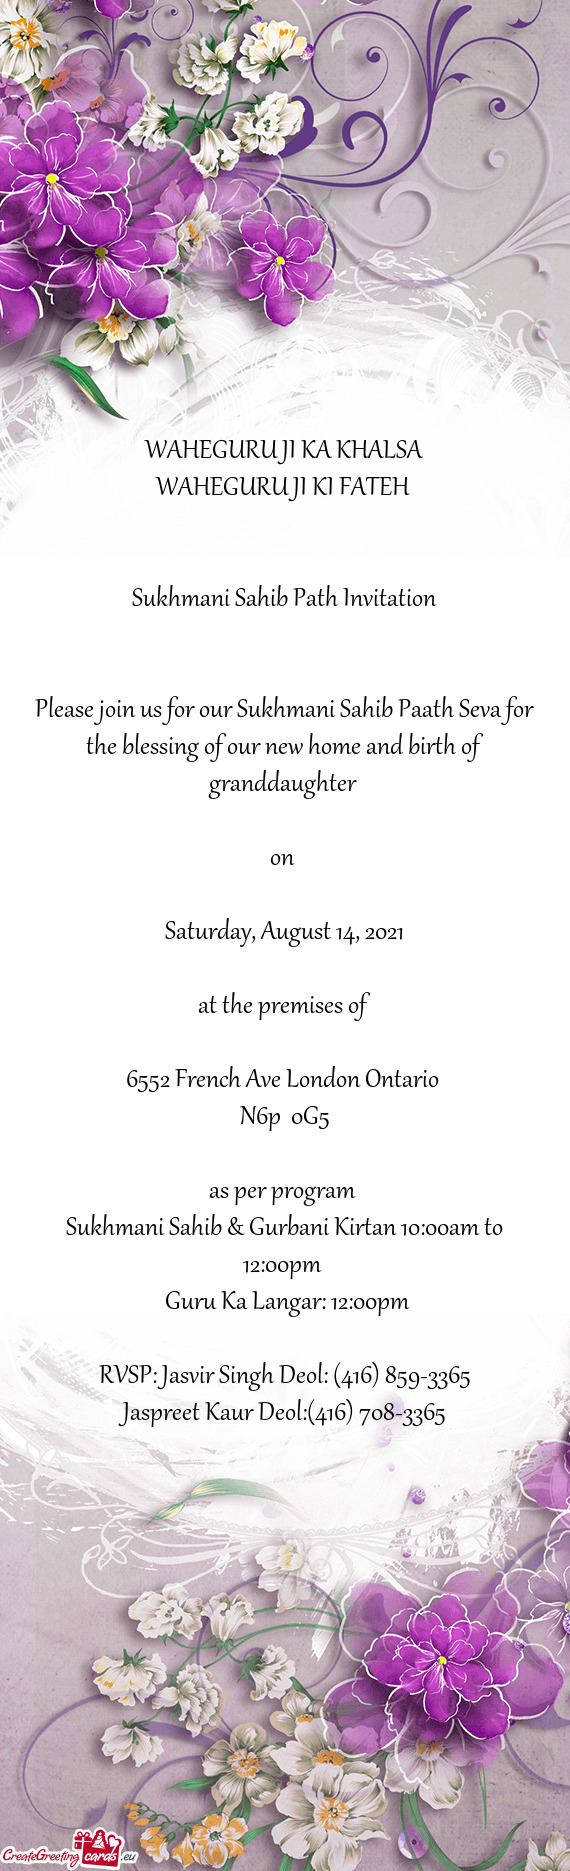 Please join us for our Sukhmani Sahib Paath Seva for the blessing of our new home and birth of grand